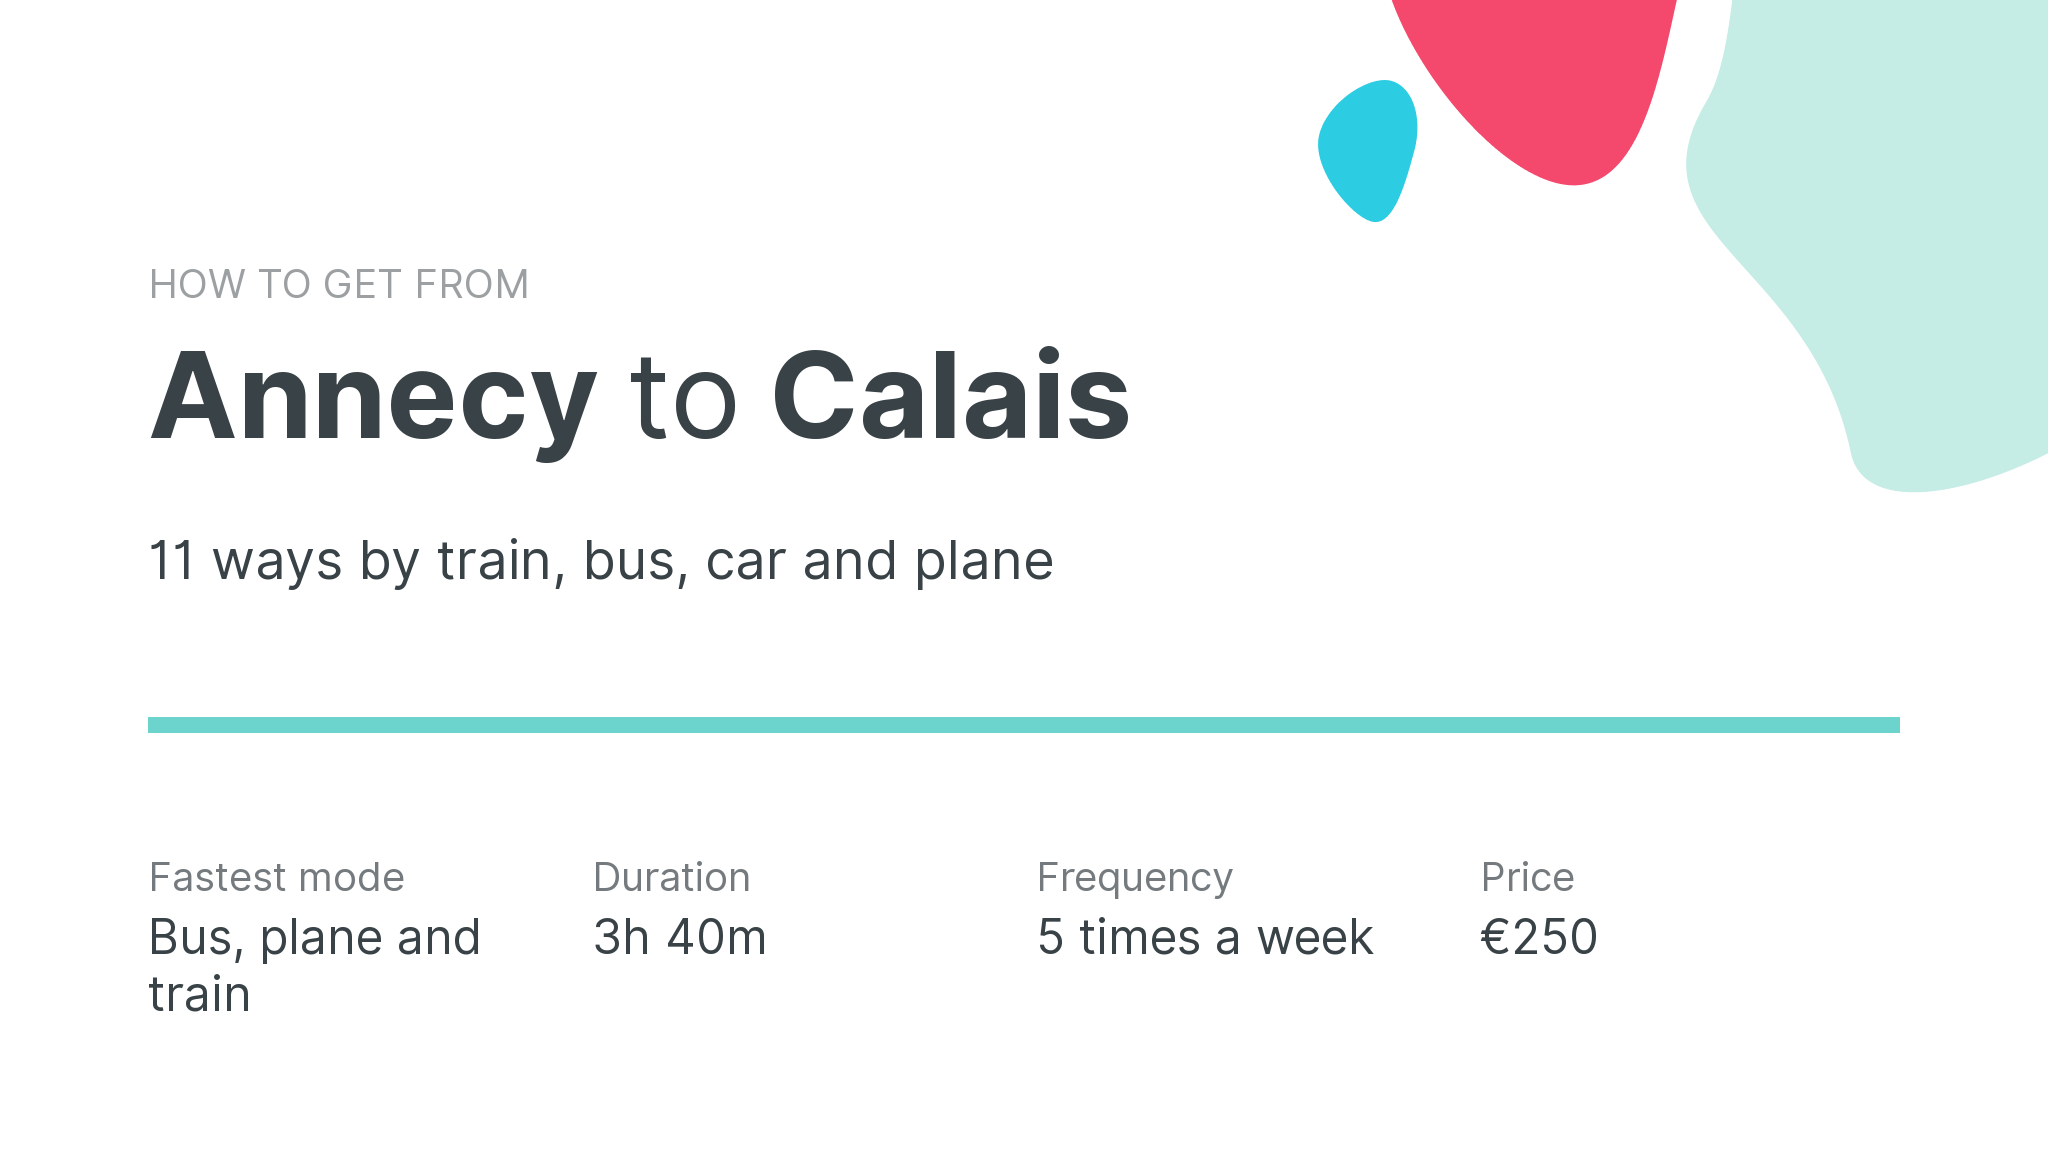 How do I get from Annecy to Calais